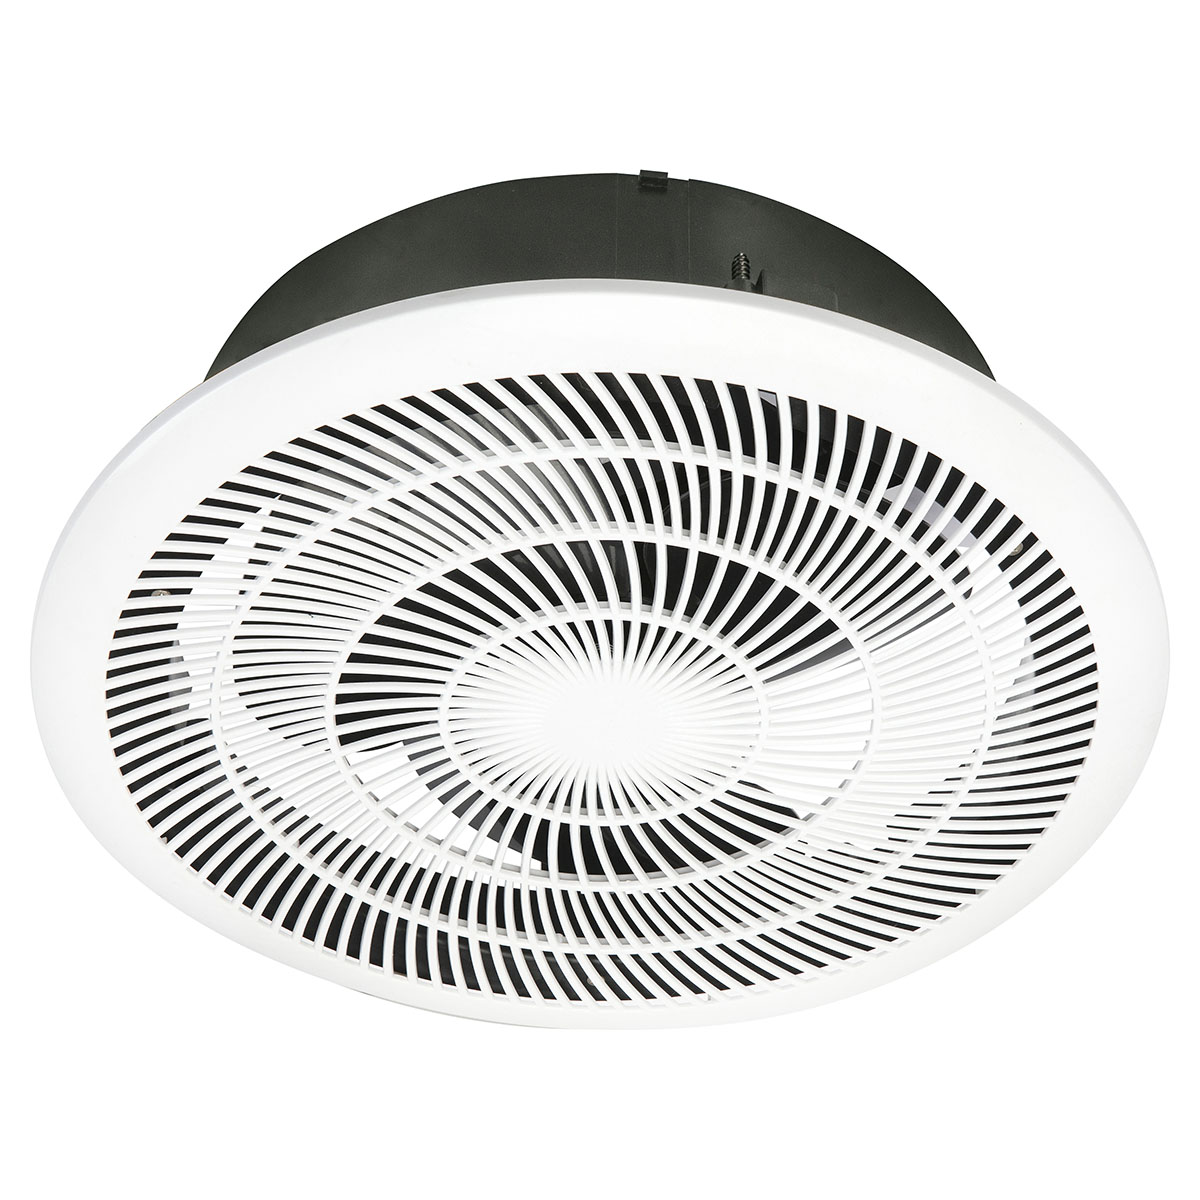 Exhaust and Ceiling Fans :: Ceiling Exhaust Fan :: Tornado ...